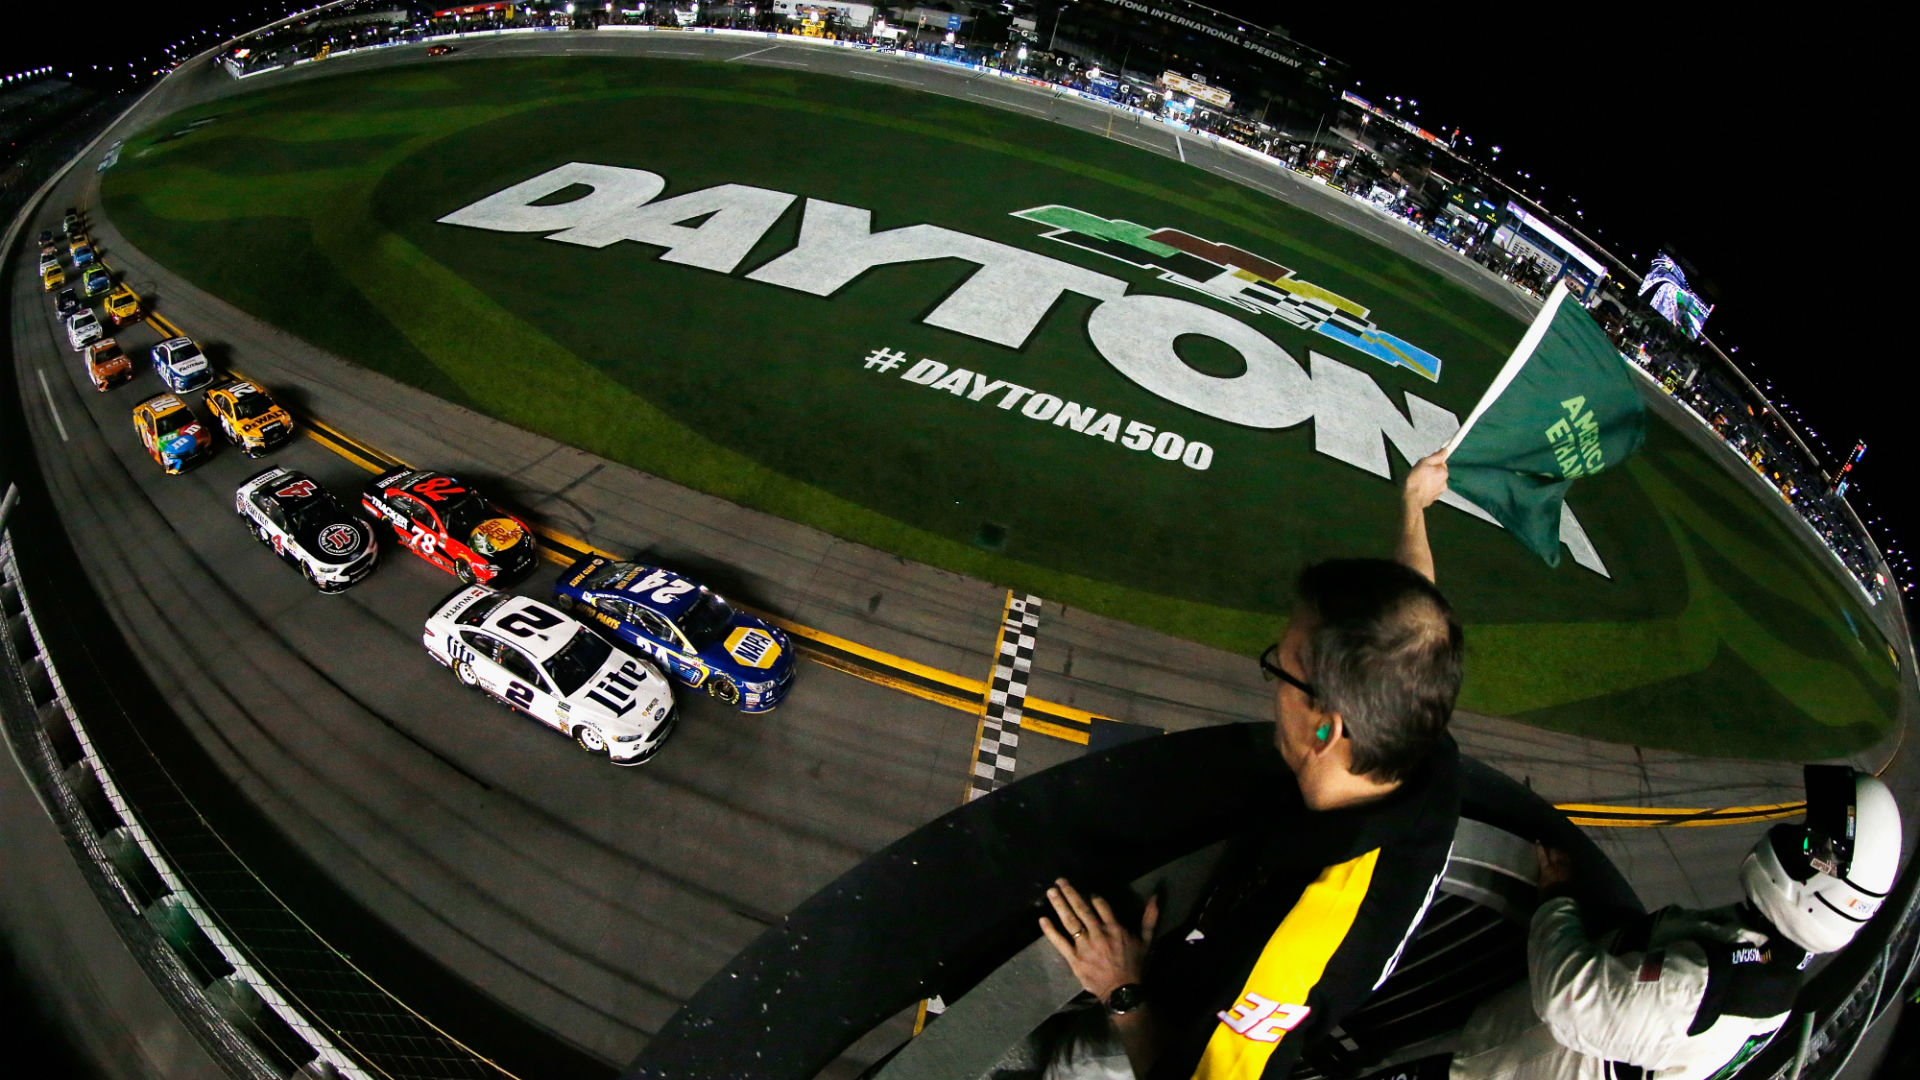 Daytona 500 qualifying Results, highlights and more from the Duel at